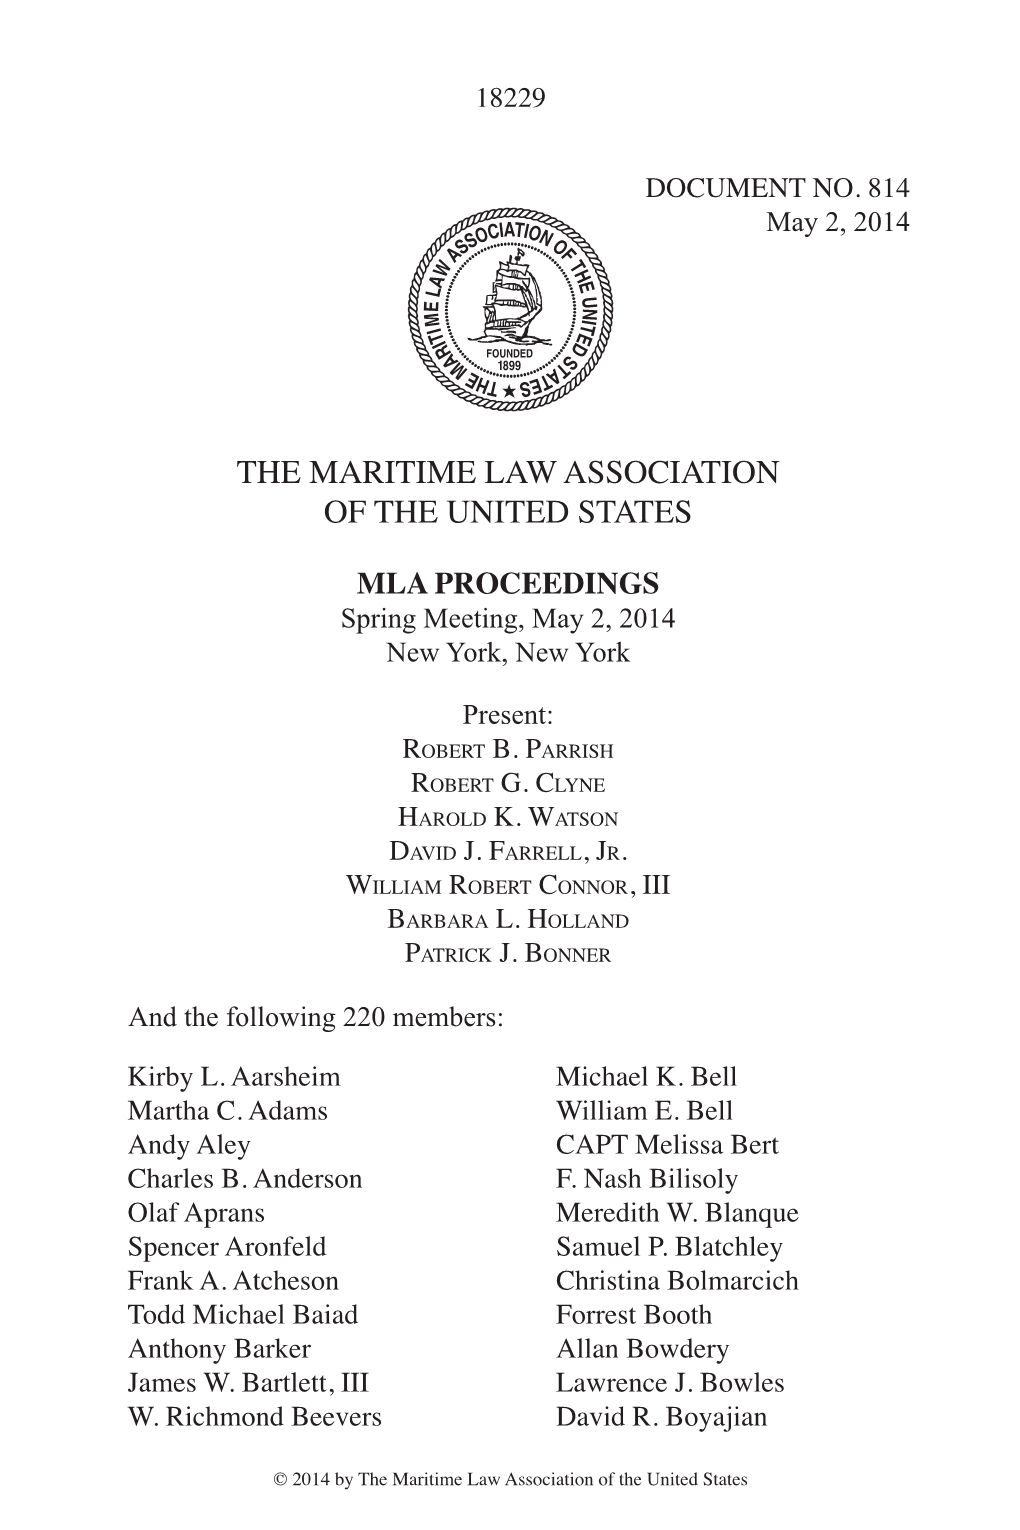 The Maritime Law Association of the United States